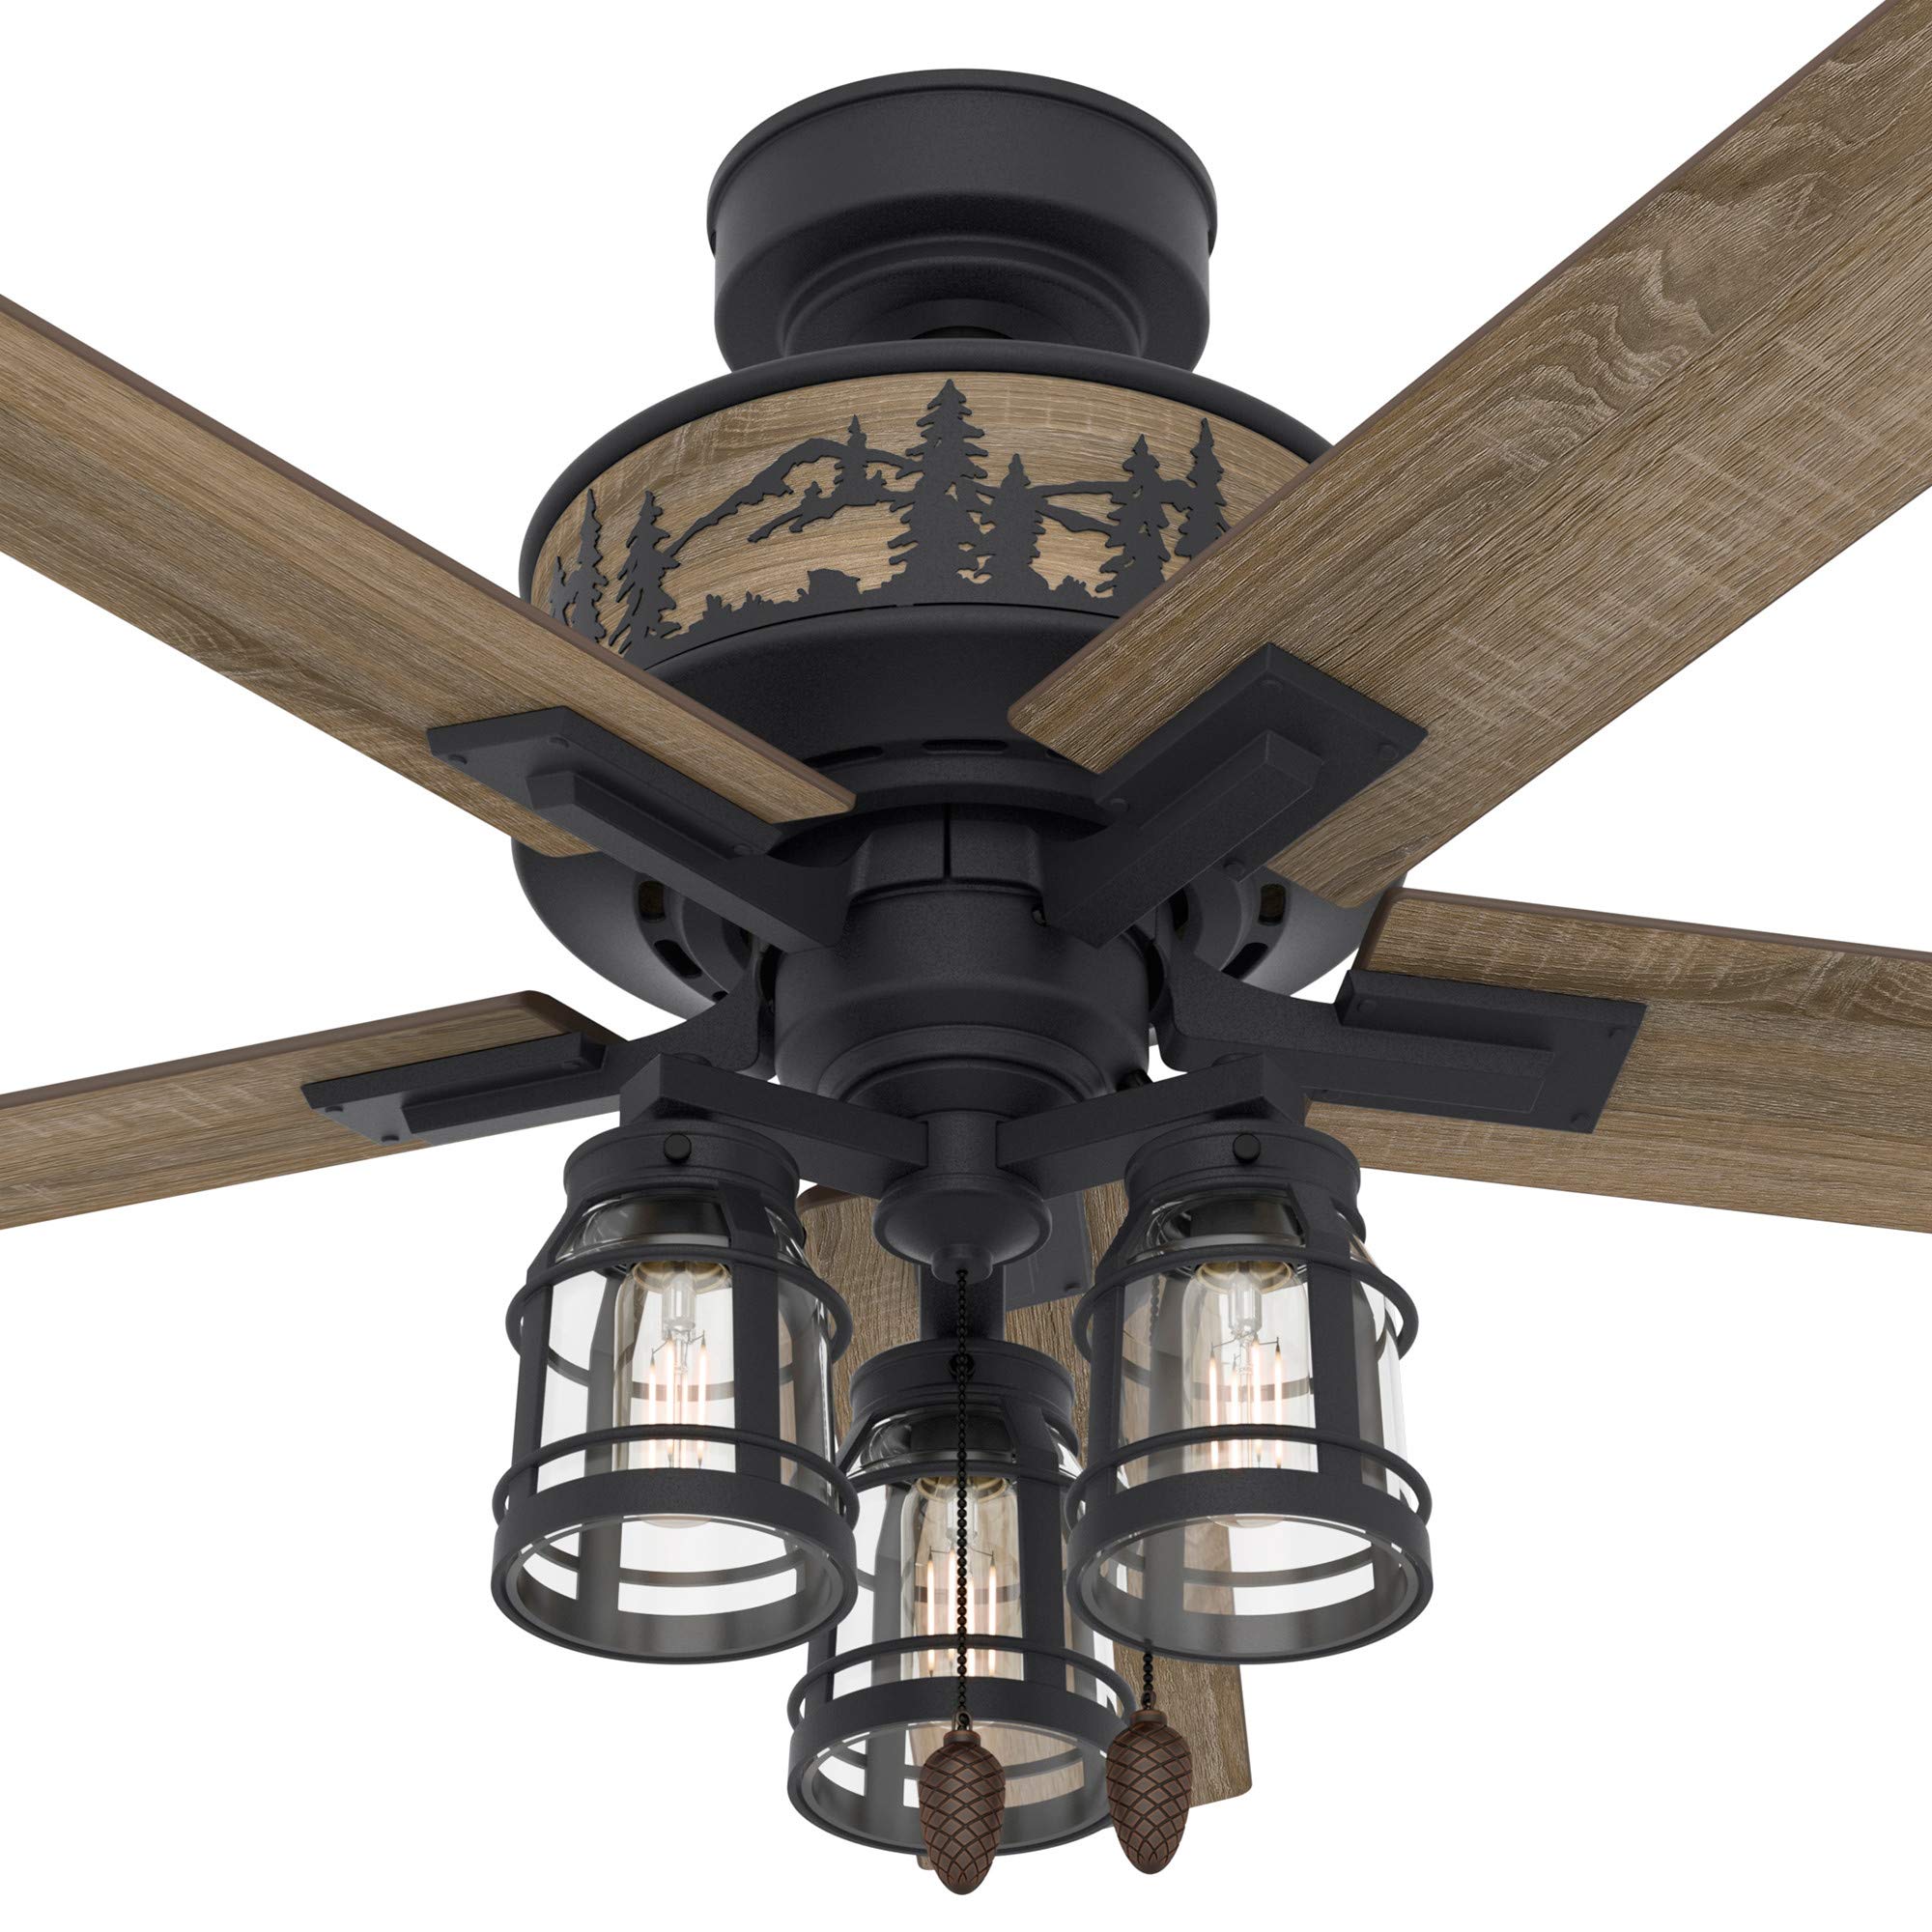 Hunter Mt. Vista Indoor Ceiling Fan with LED Lights and Pull Chain Control, 52